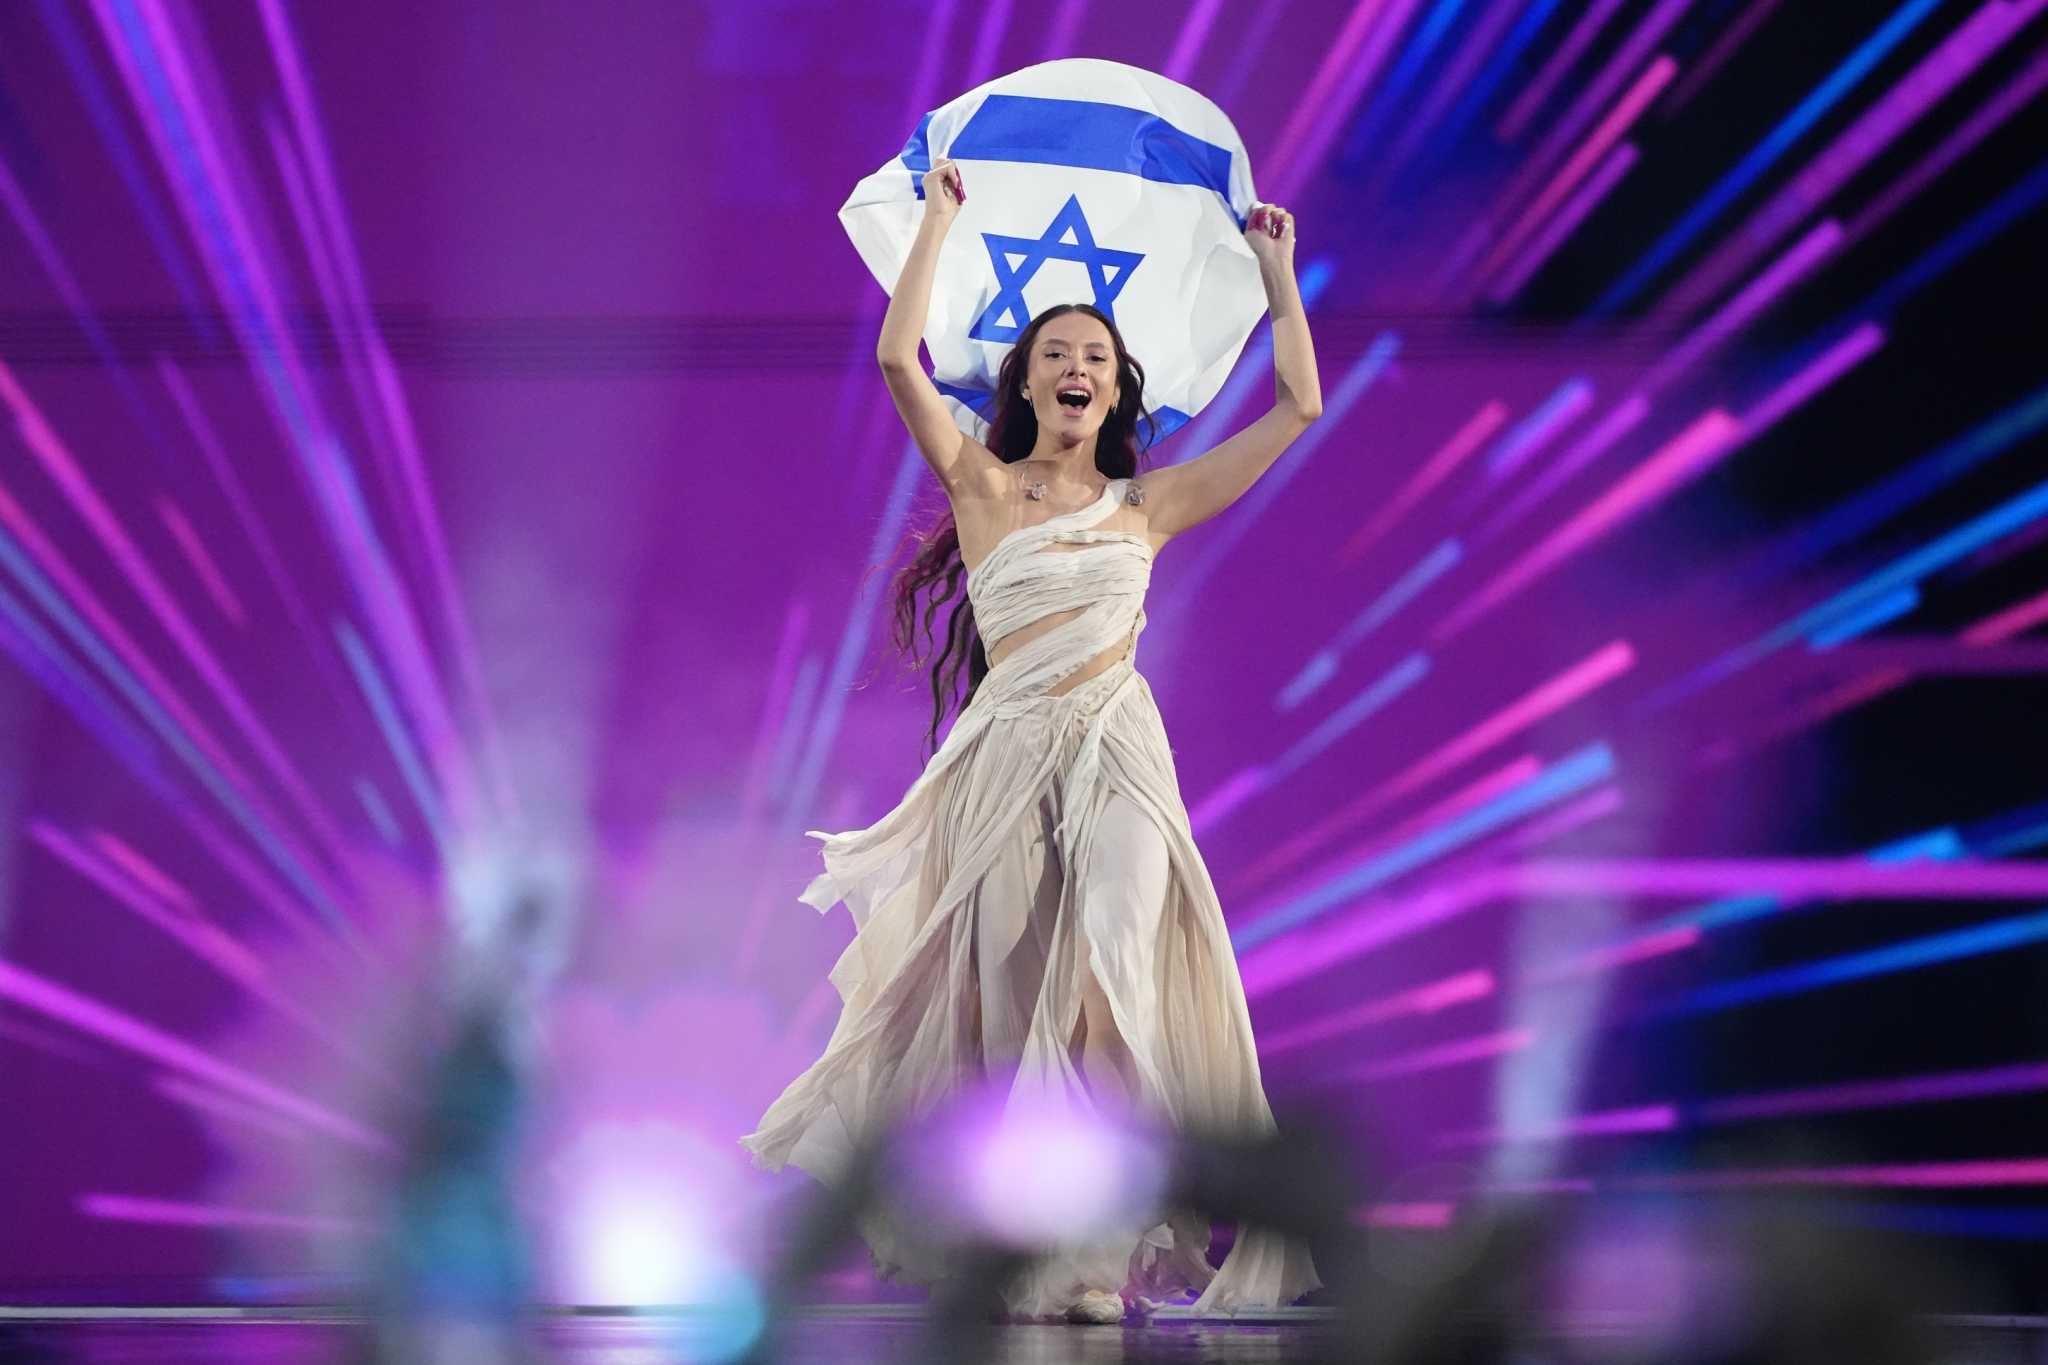 Eurovision Song Contest final takes stage after protests, backstage chaos and contestant's expulsion